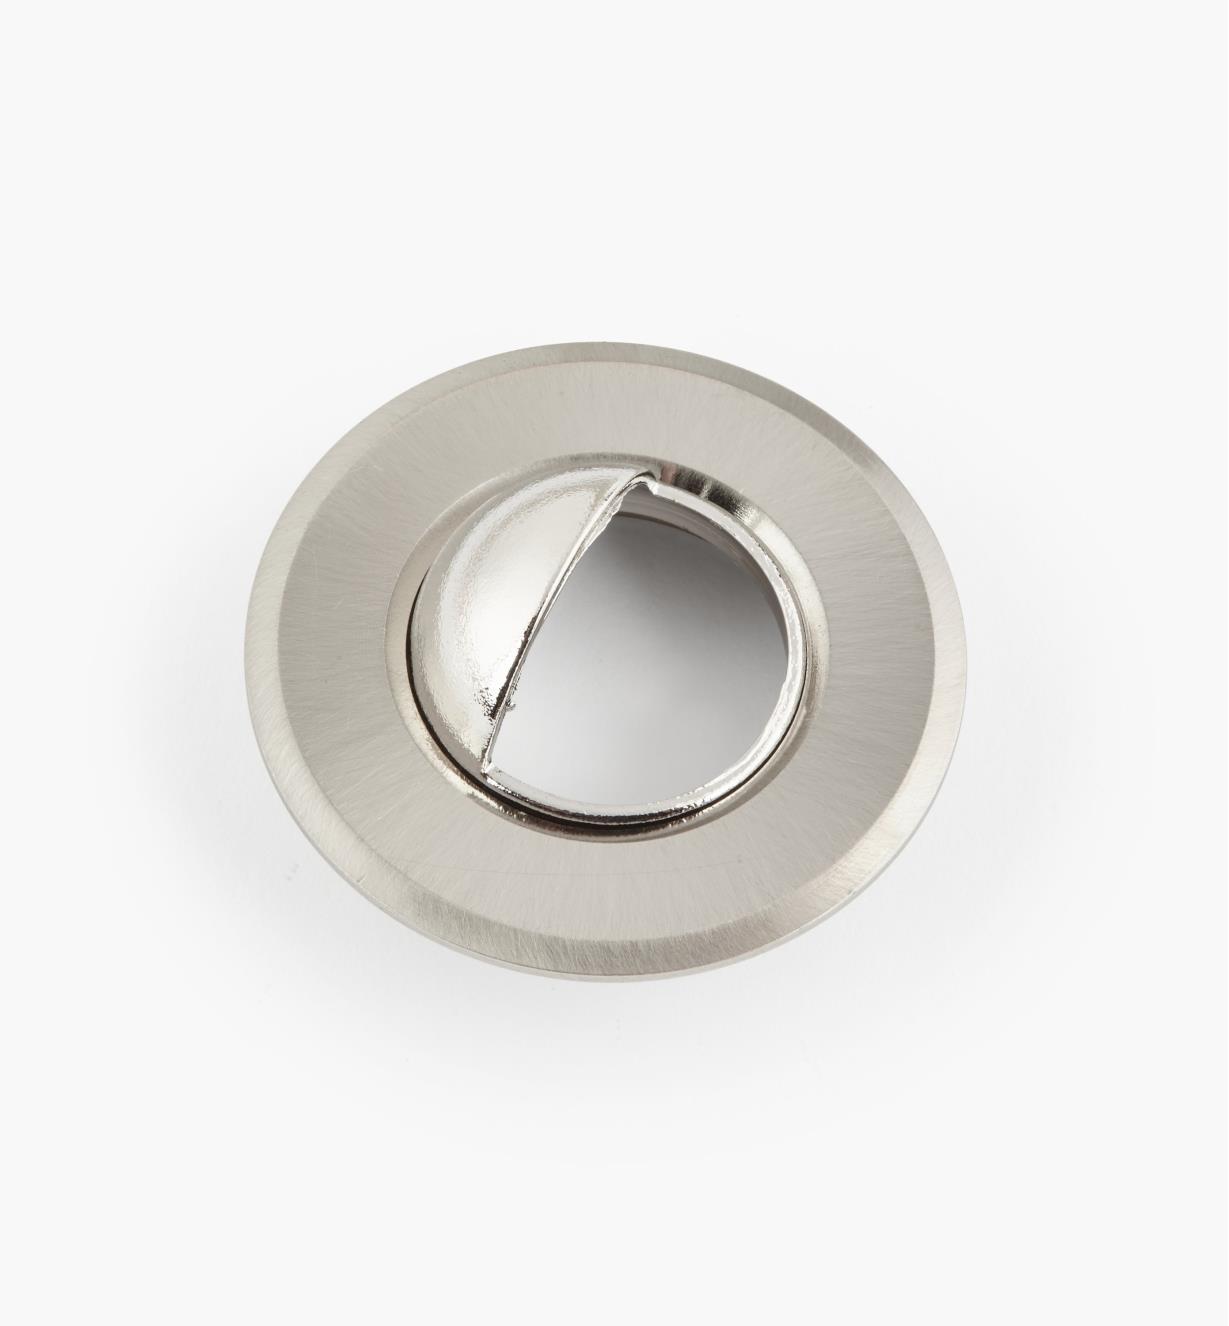 00U4357 - 1 1/2" Brushed Steel Round Aluminum Trim Ring with Shield